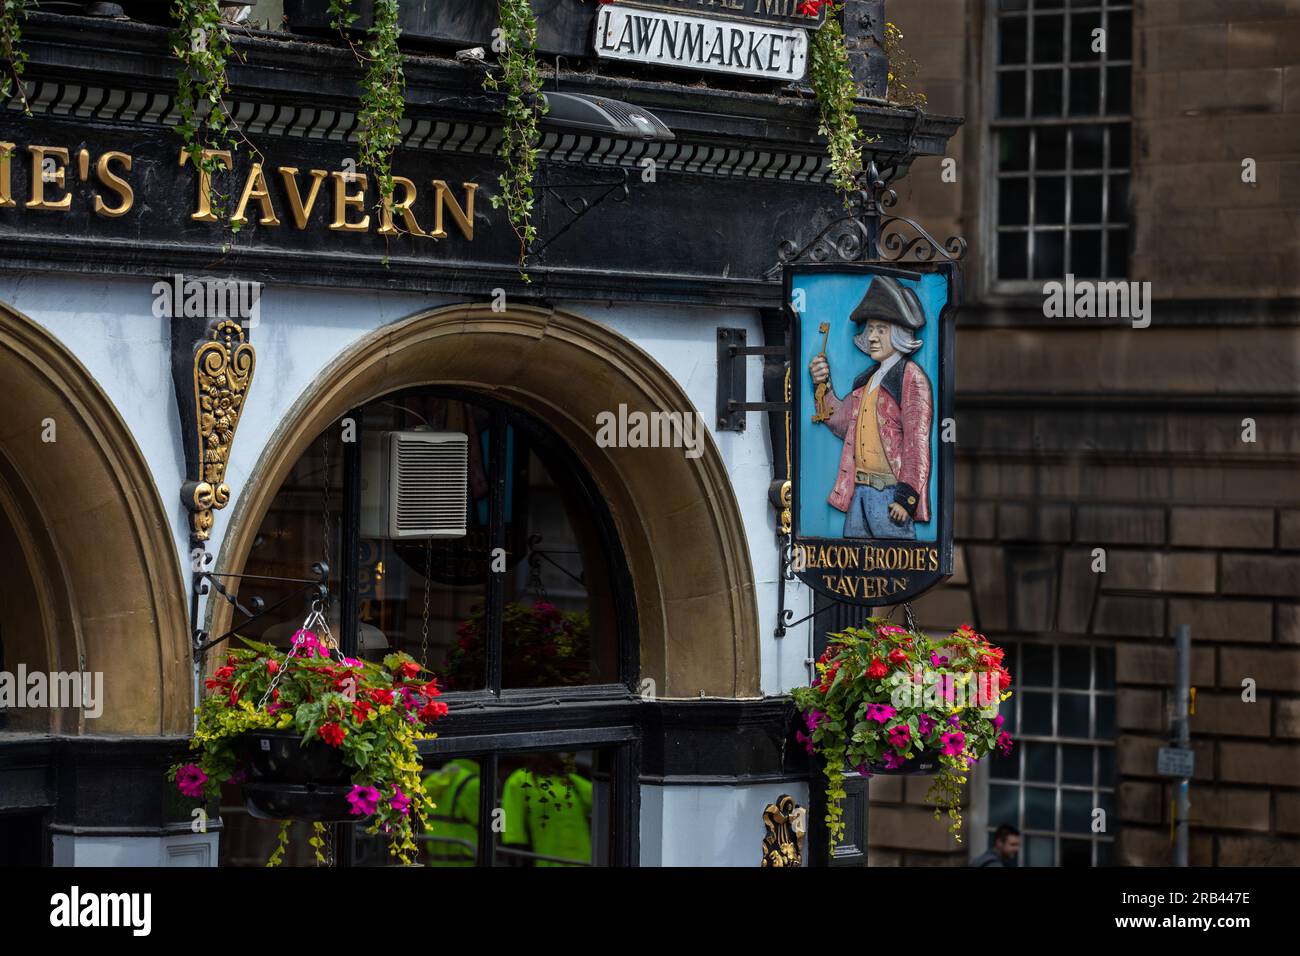 The pub sign for Deacon Brodie's Tavern on the Lawmarket, The Royal Mile, Edinburgh Stock Photo